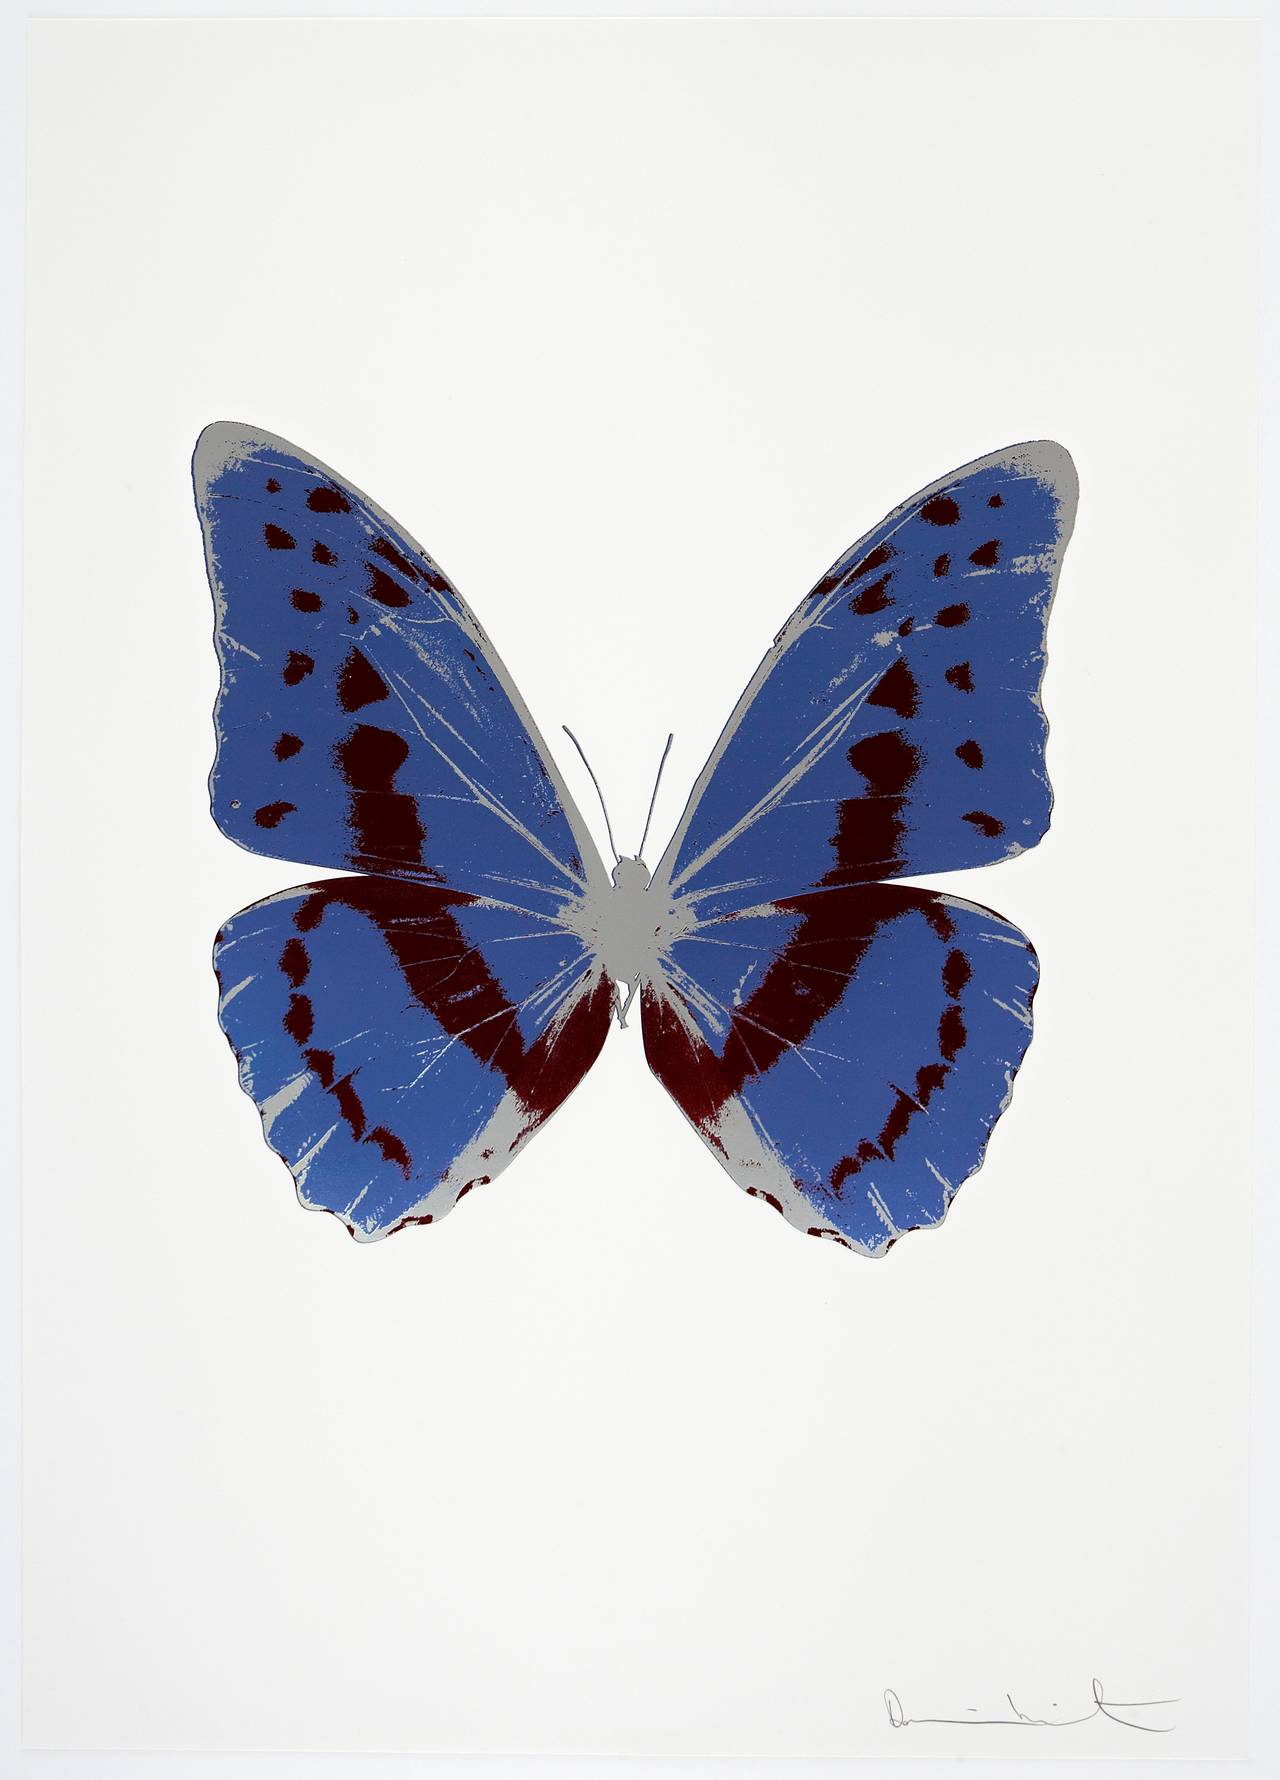 The Souls III - Print by Damien Hirst